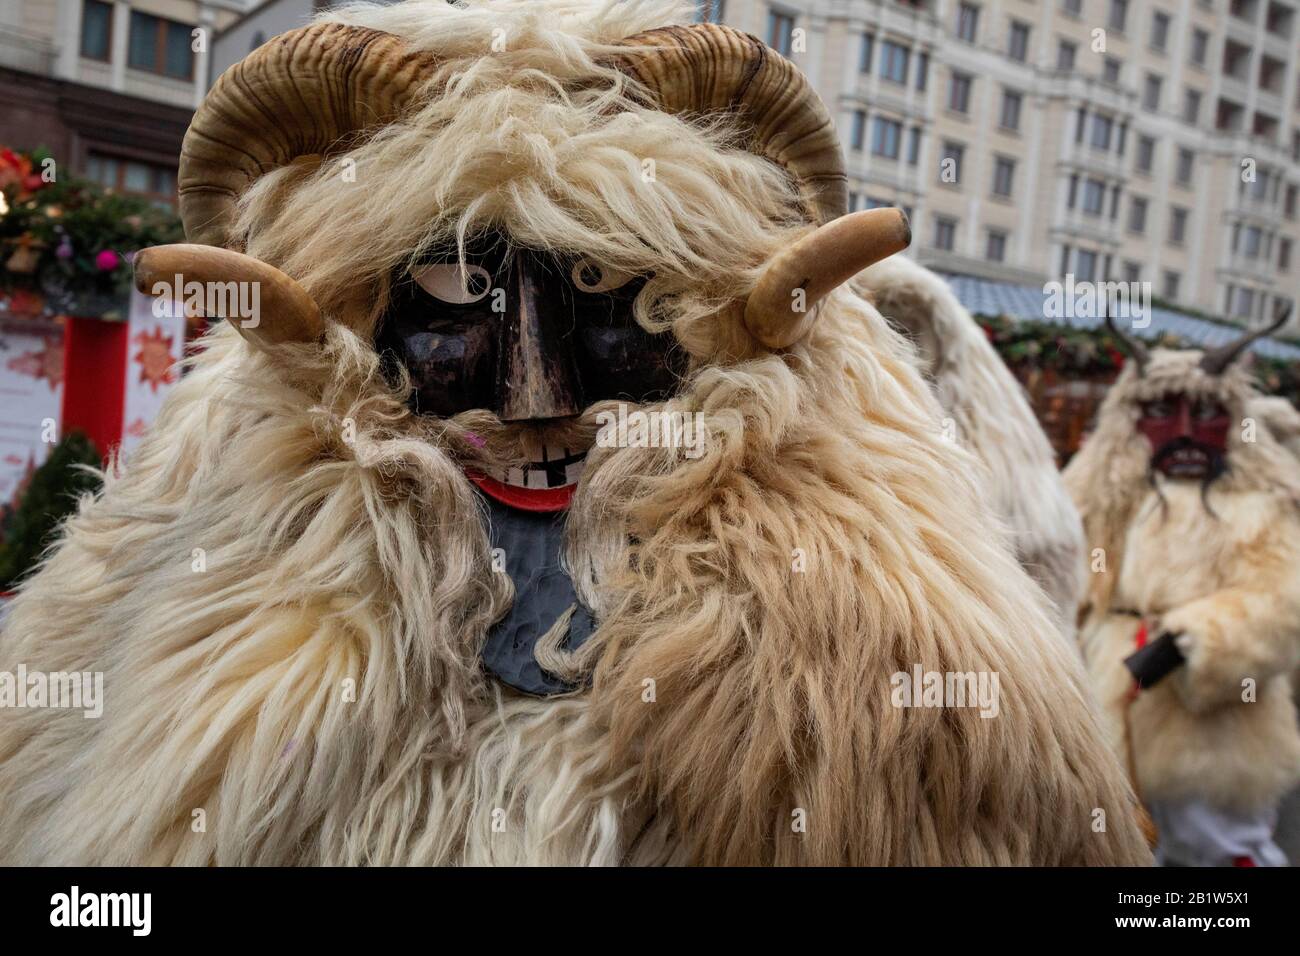 Moscow, Russia. 27th of February, 2020 People wearing traditional Hungarian masks and costumes (Busos) at the Carnival parade during celebration Maslenitsa holiday (Russian pancake week) on Manege Square in Moscow, Russia Stock Photo